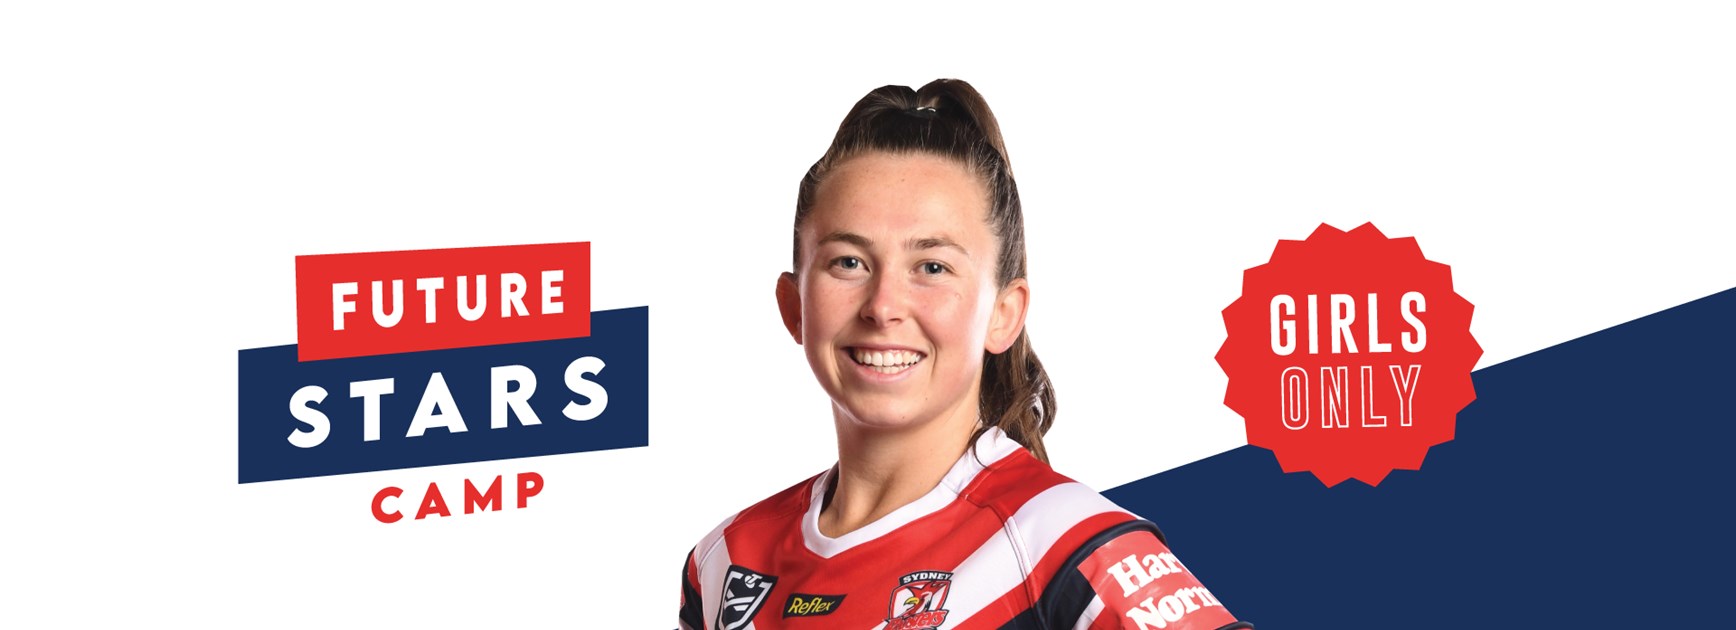 Roosters Future Stars Girls Camp Coming This April!